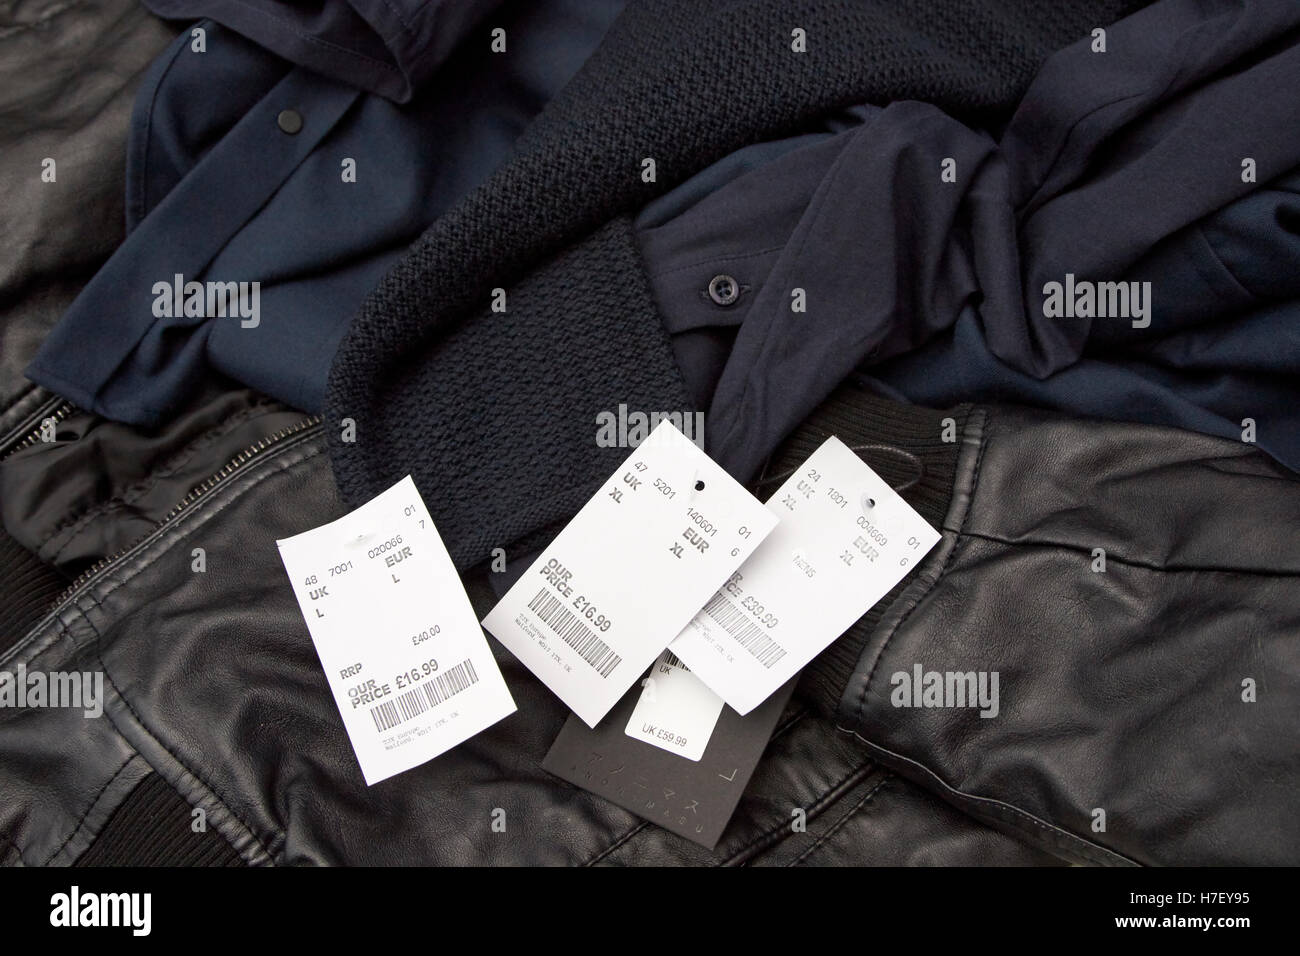 tkmax reduced price tags on mens clothing Stock Photo